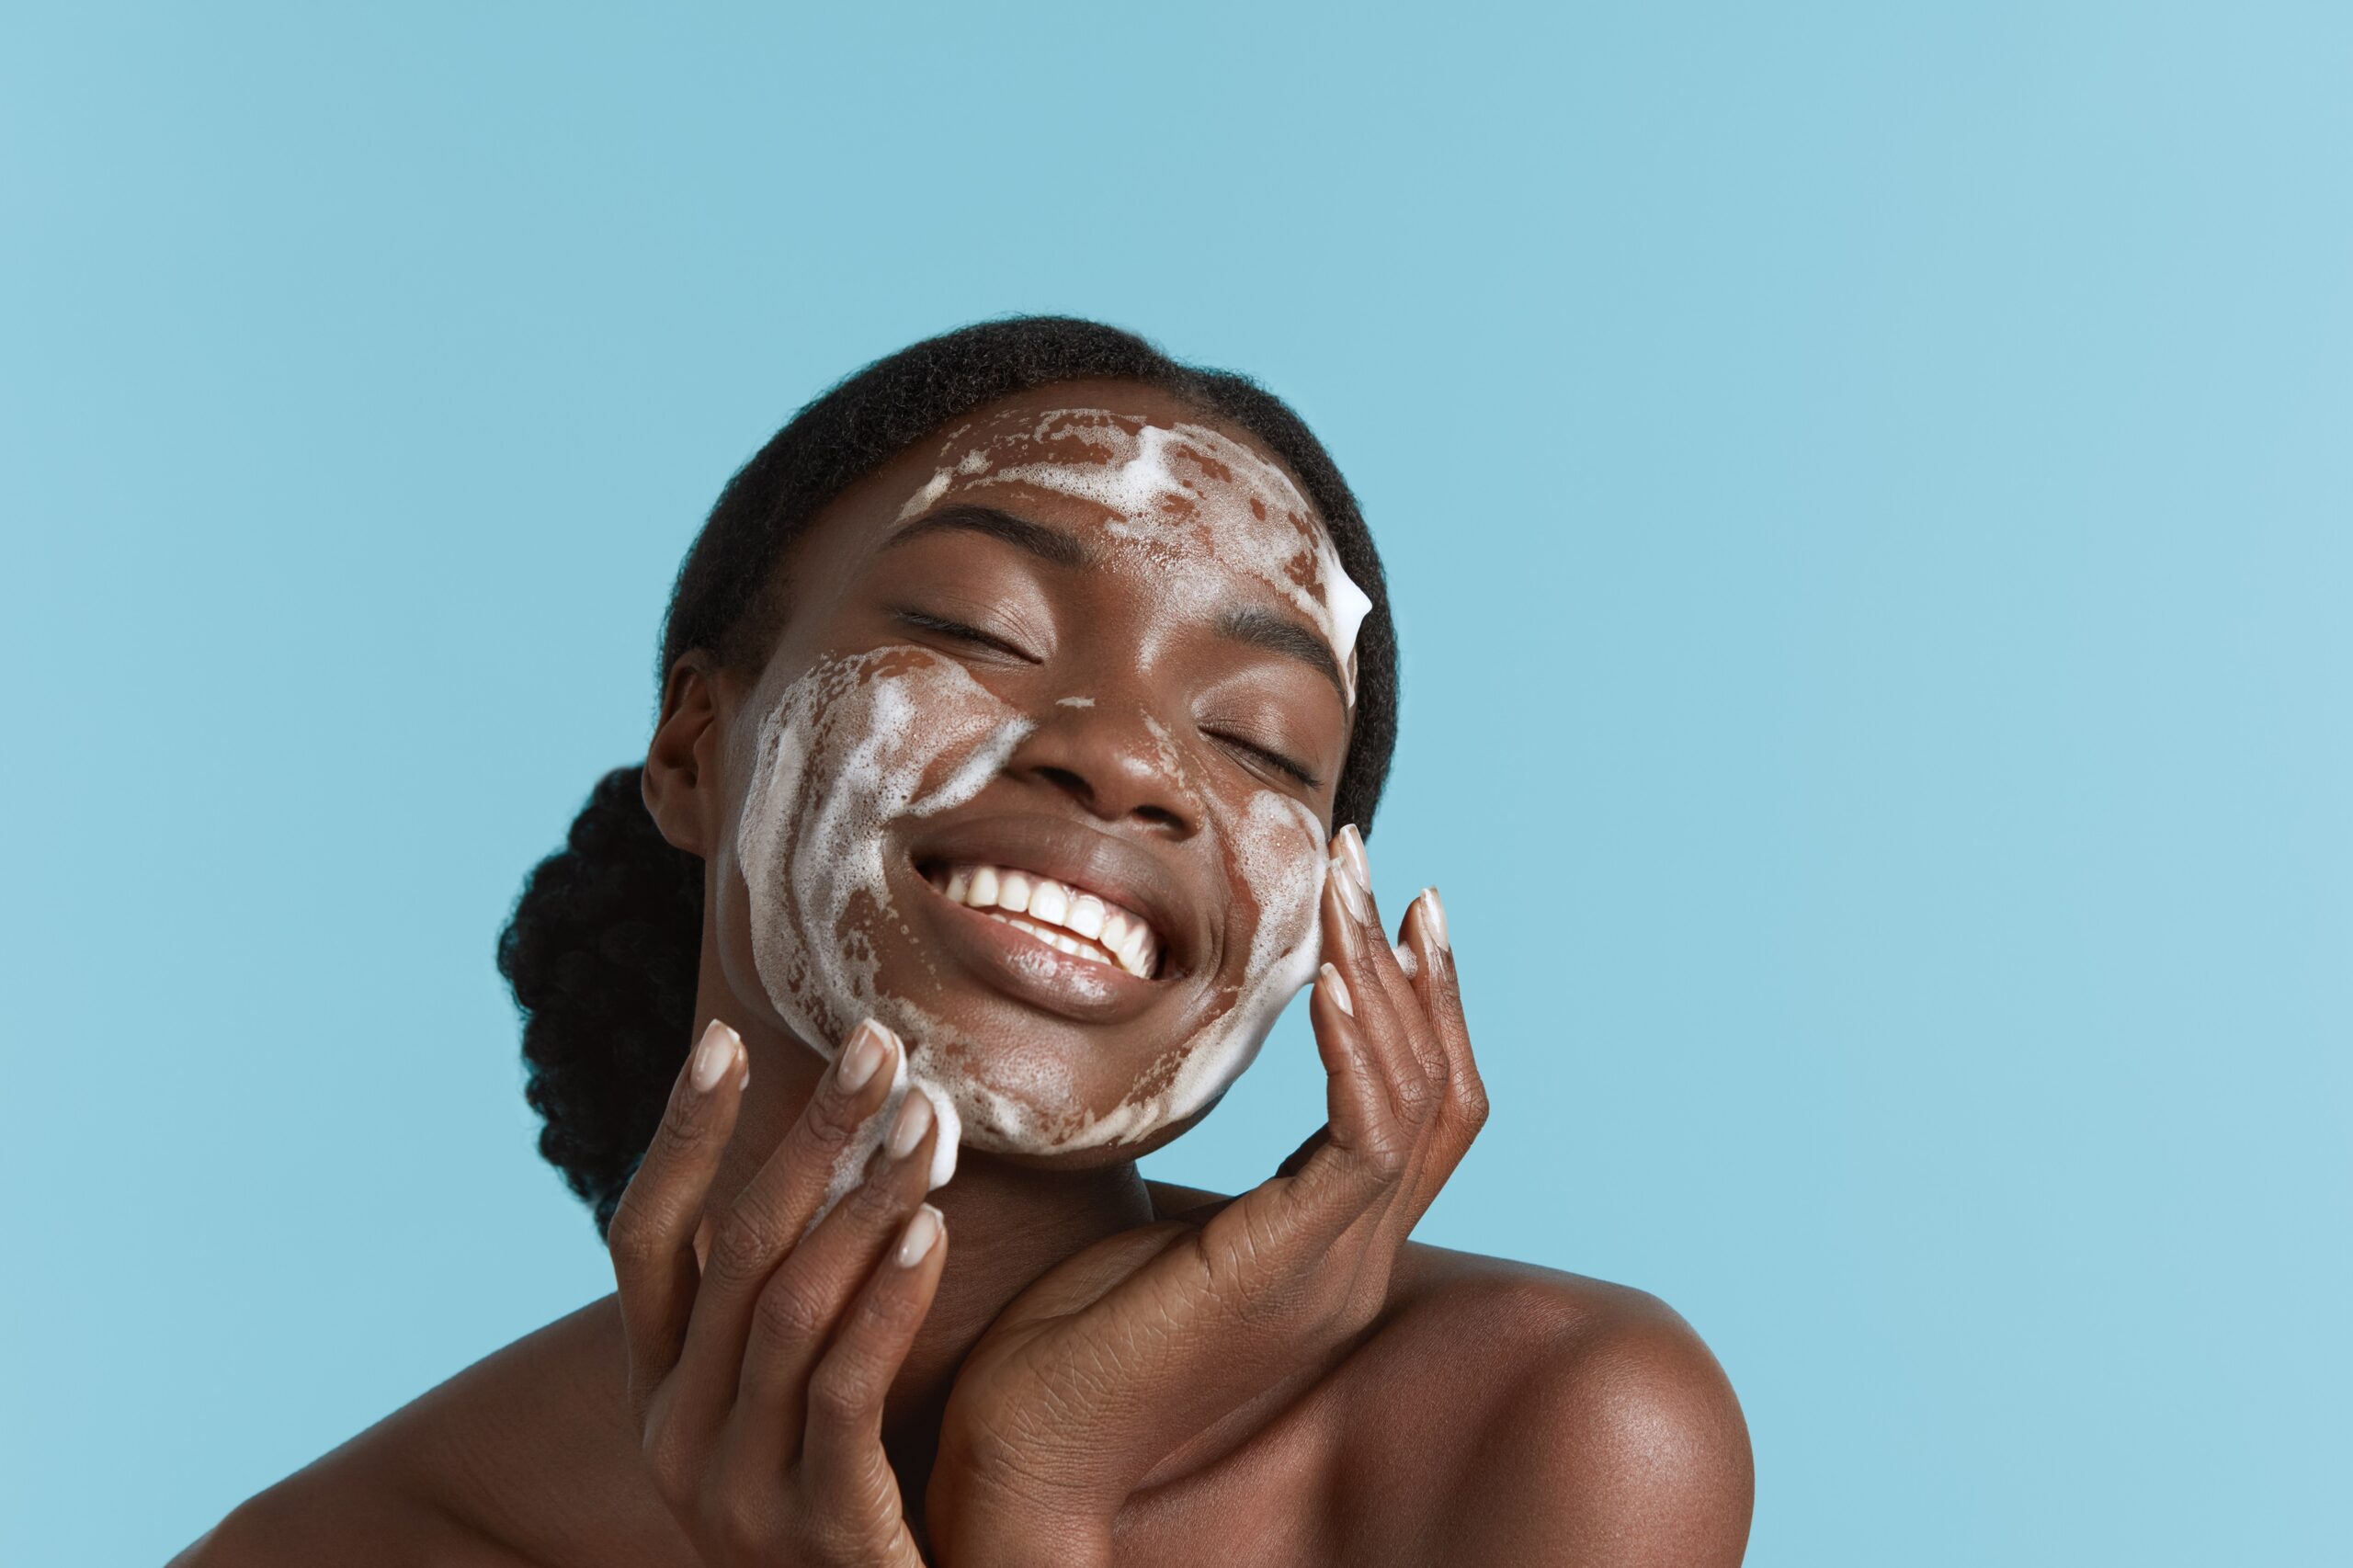 Clean Ingredient Hygiene Tips For Every Grown Woman